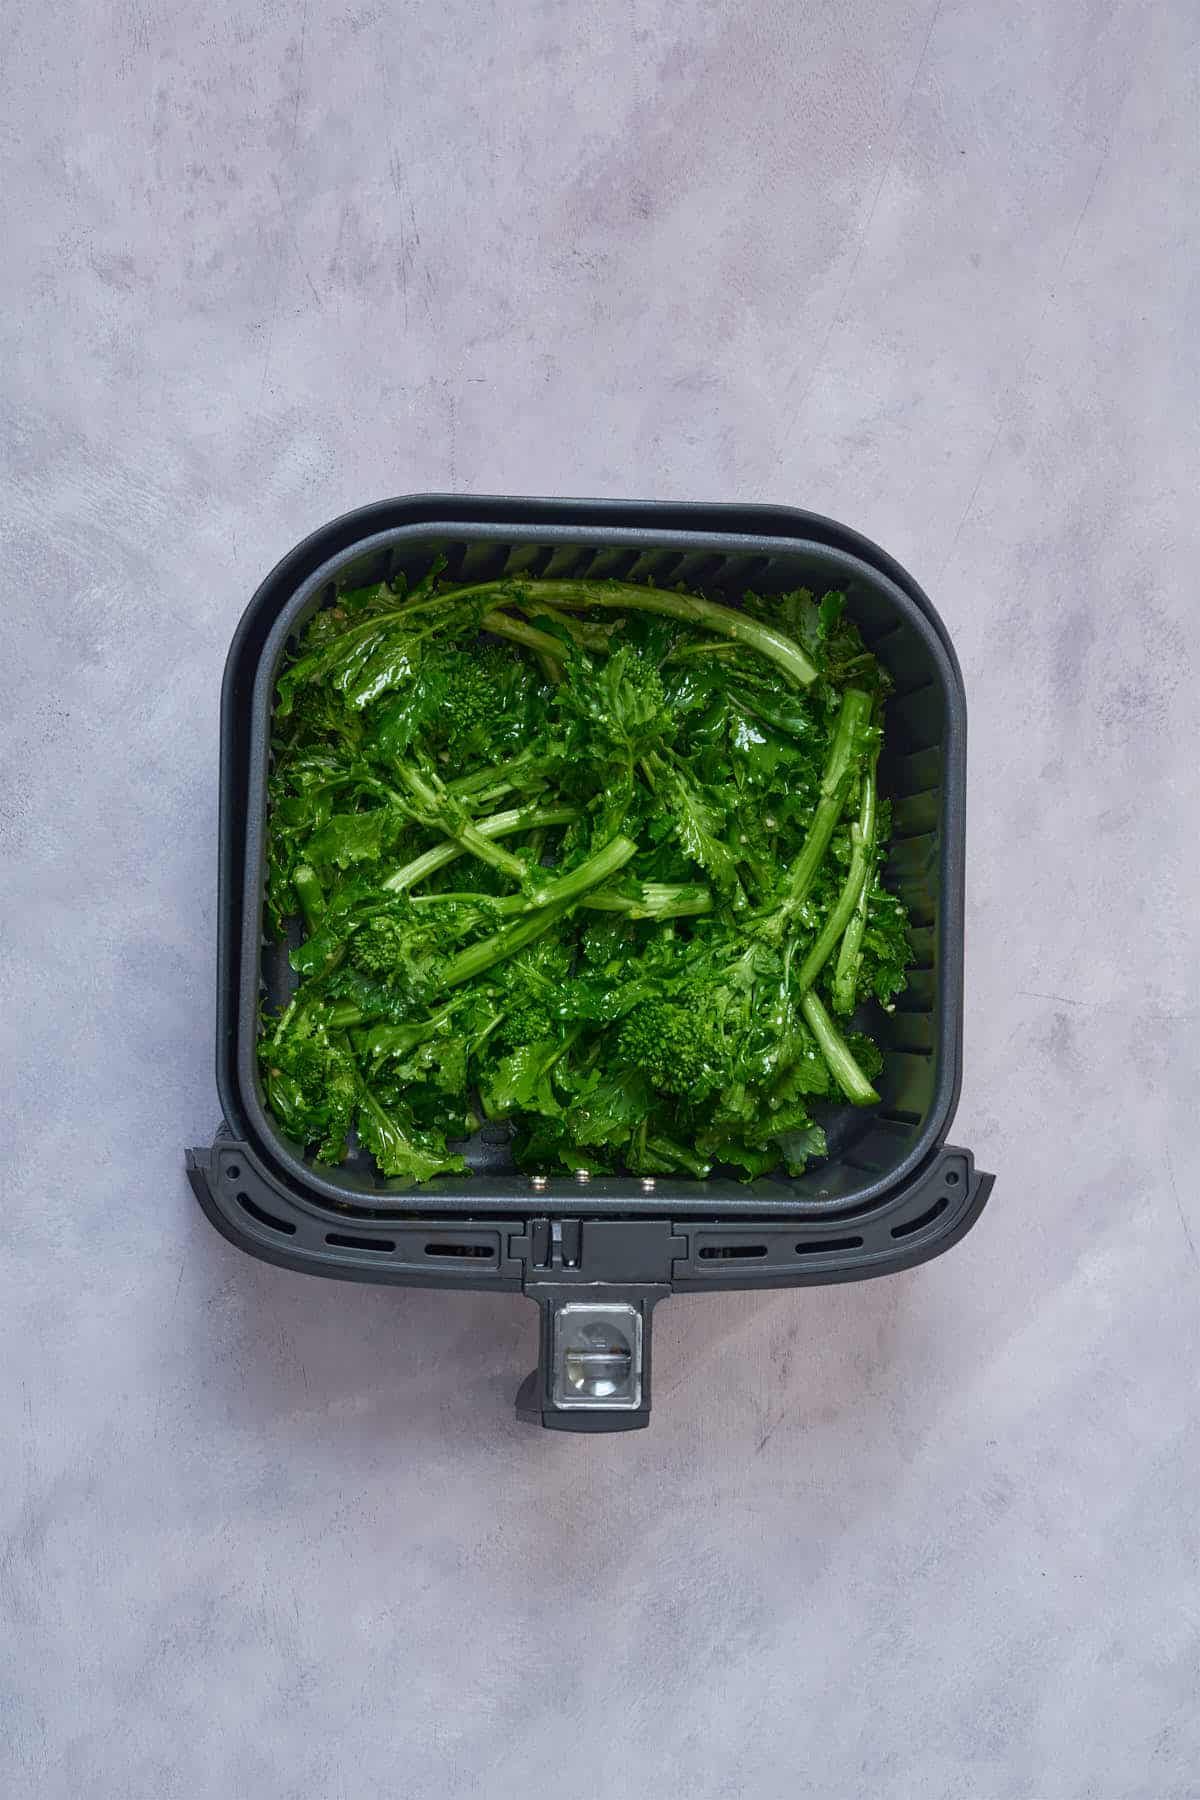 Broccoli rabe in the air fryer basket before cooking.